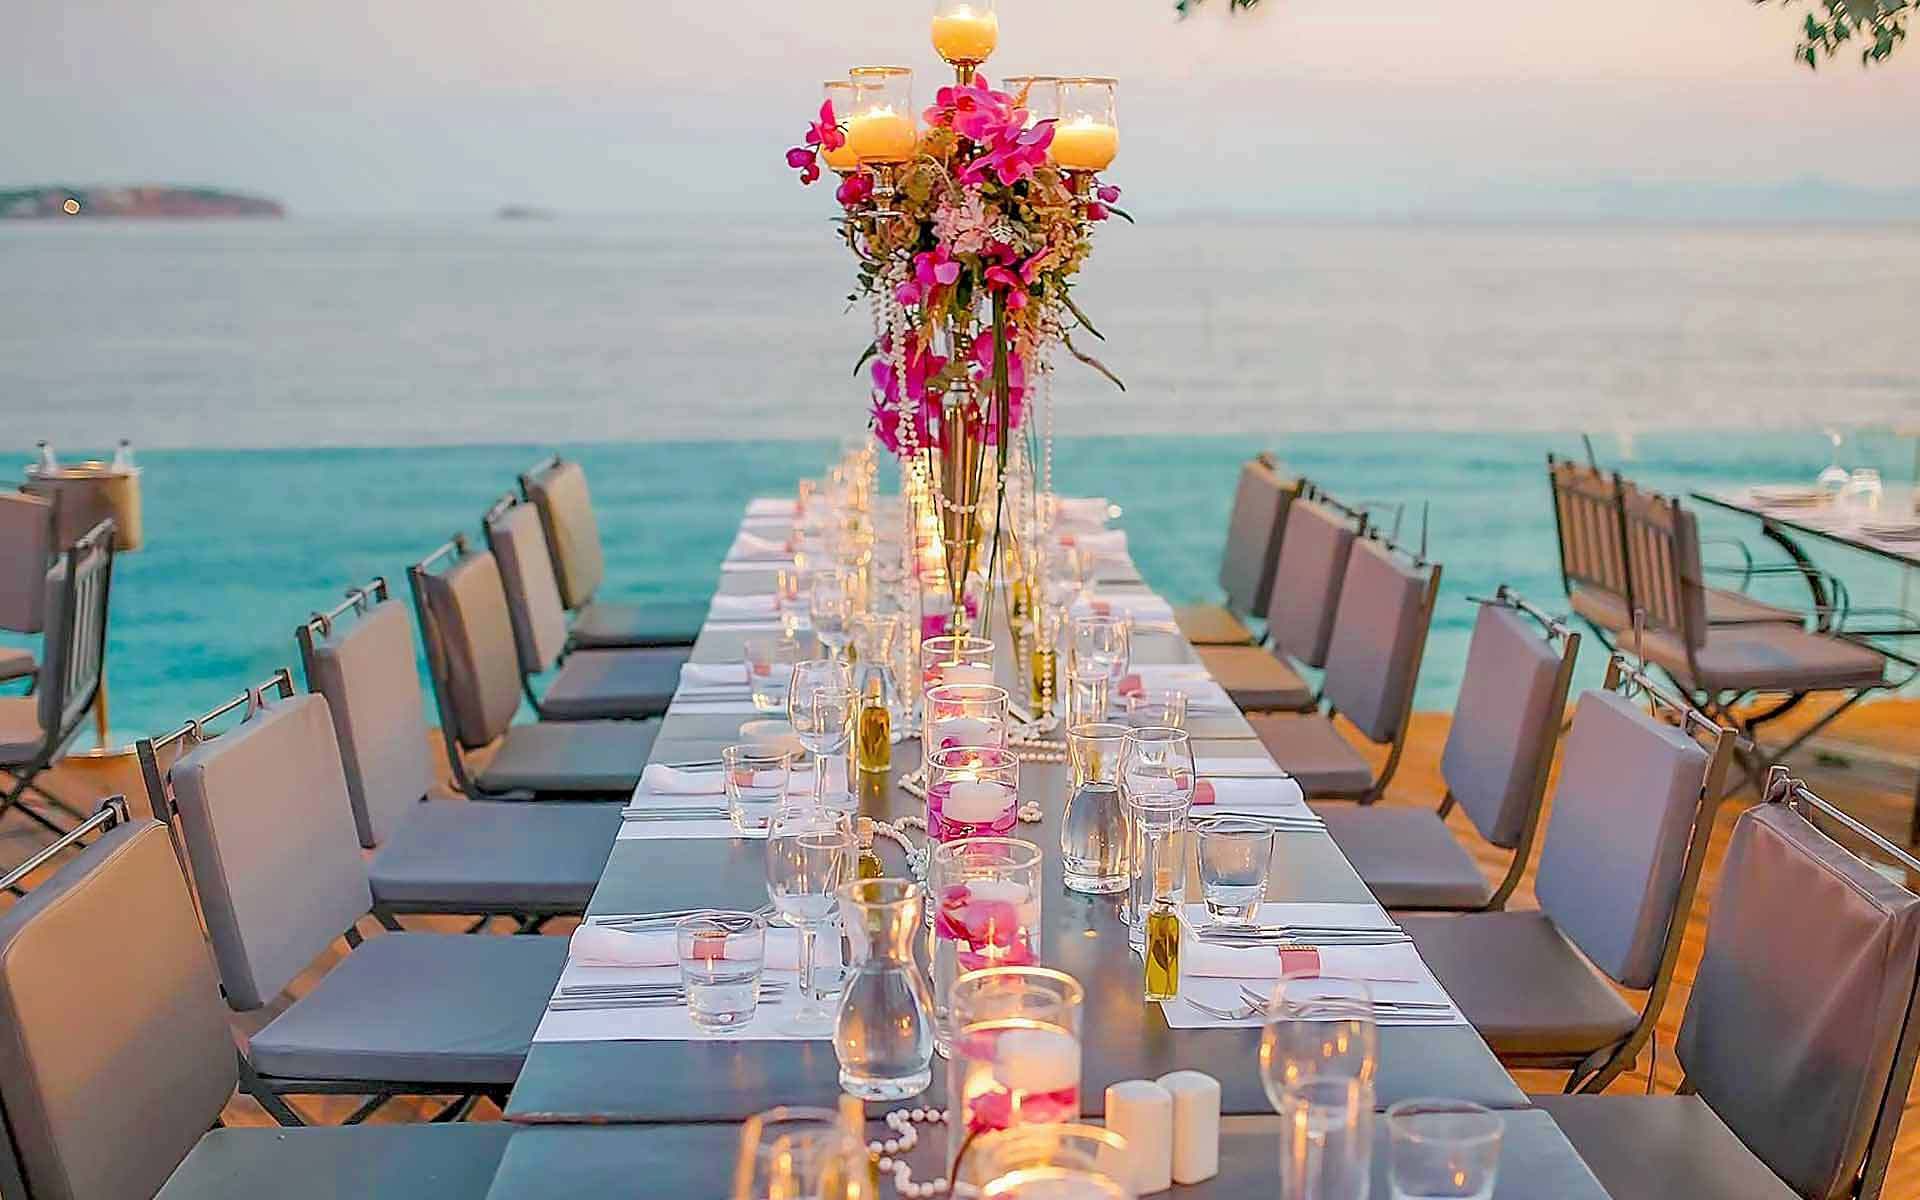 Wonderful Romantic Dinner By The Sea In Vive Mar, Vouliagmeni, Athens, Greece